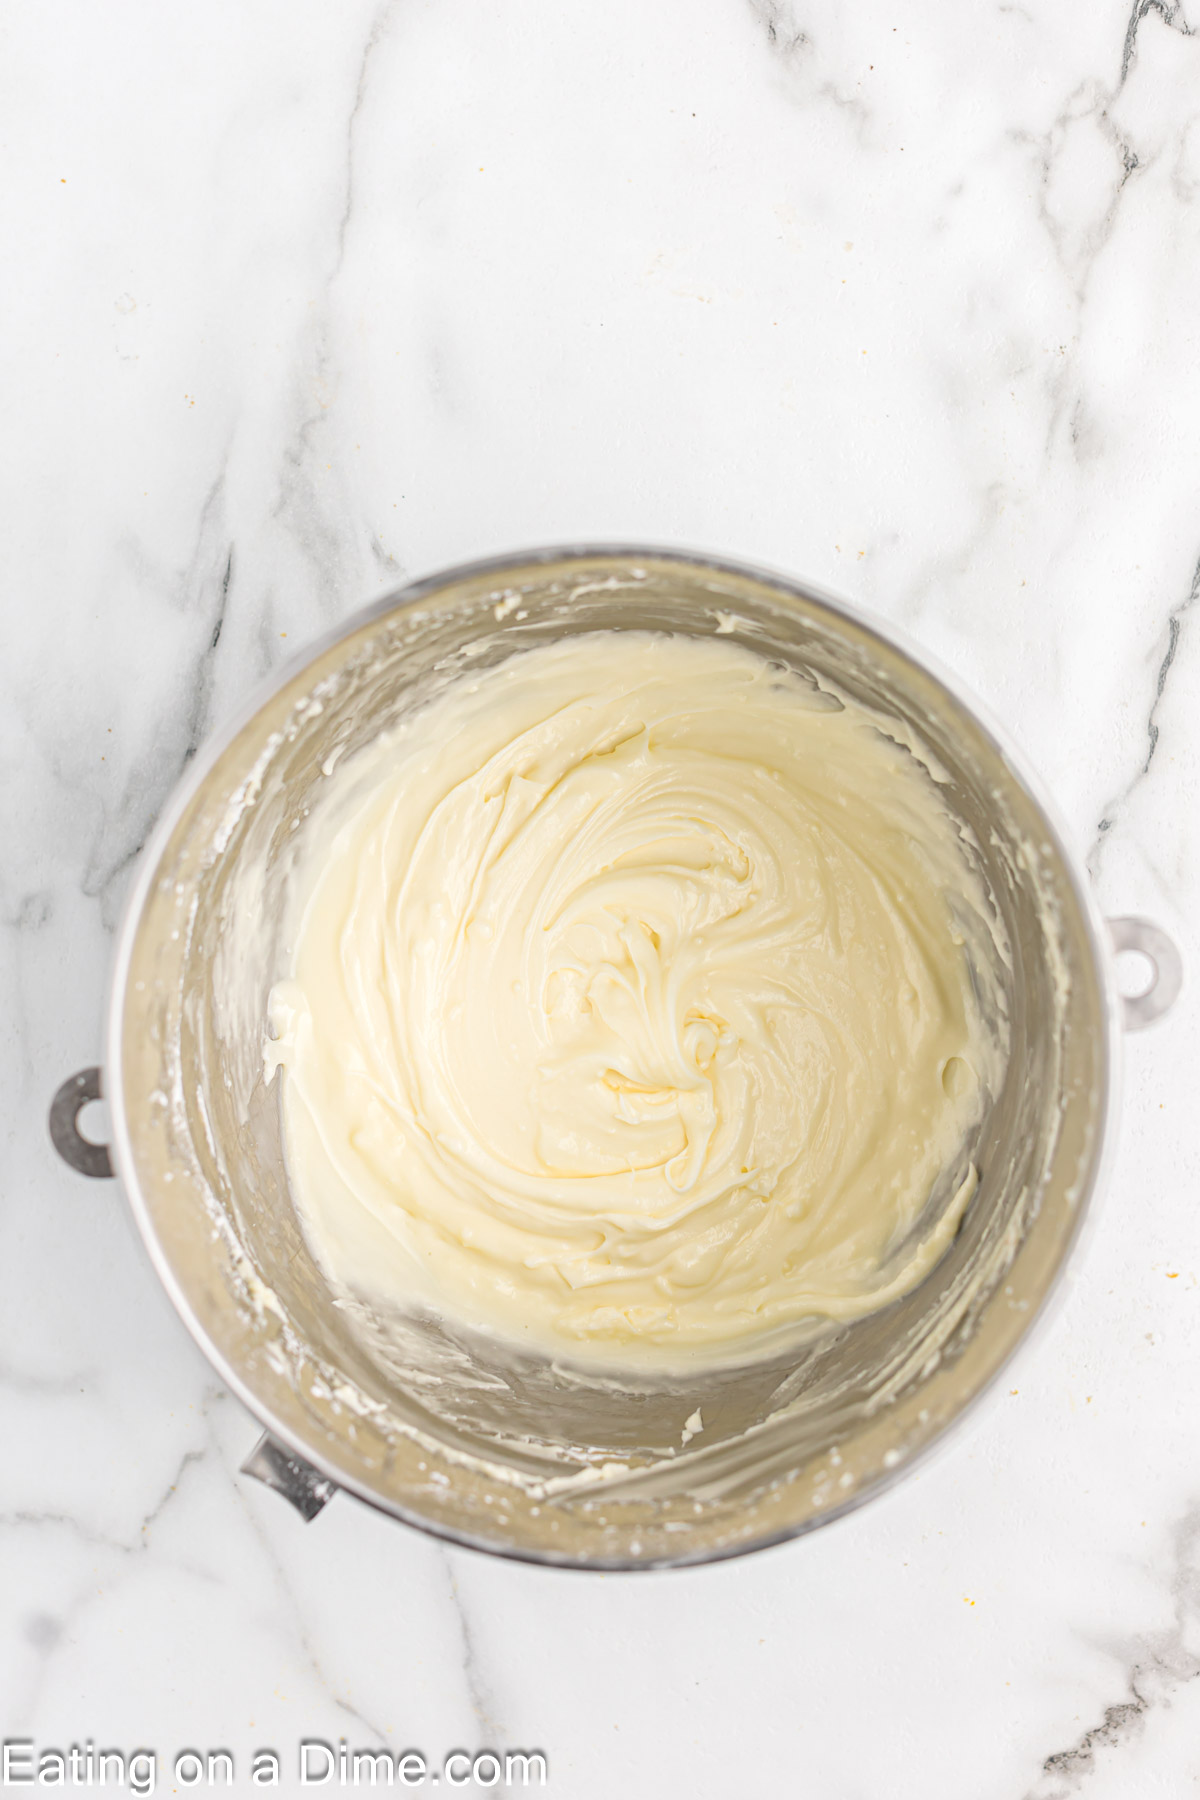 Combining the cream cheese frosting ingredients in a bowl